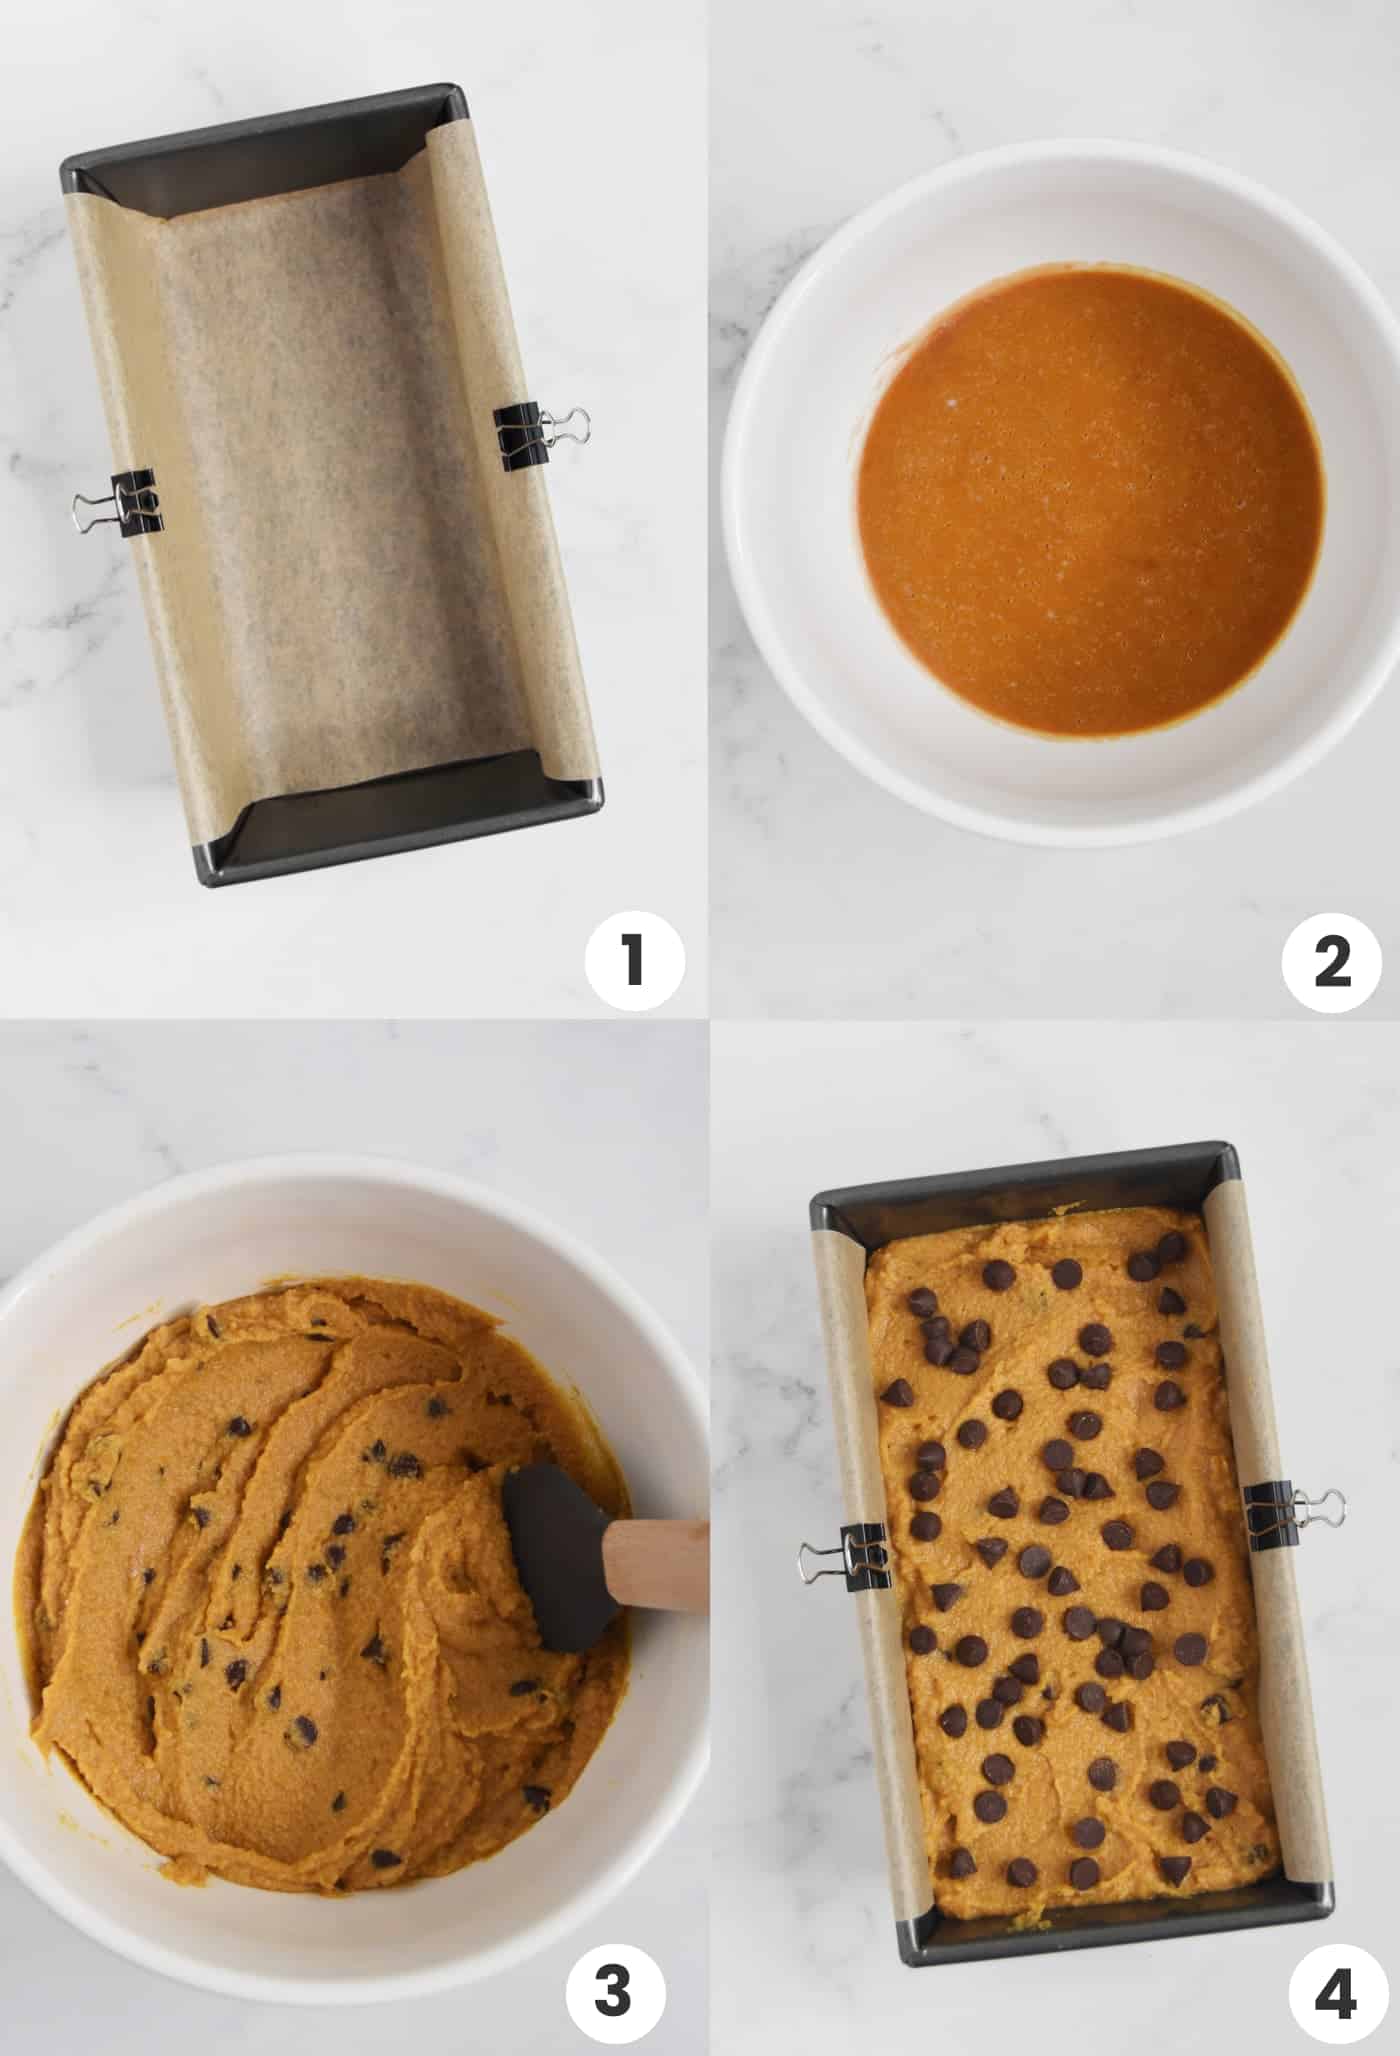 Step by step for how to make pumpkin bread, including lining the bread pan, whisking the wet ingredients, mixing the batter, and transferring it to a loaf pan.